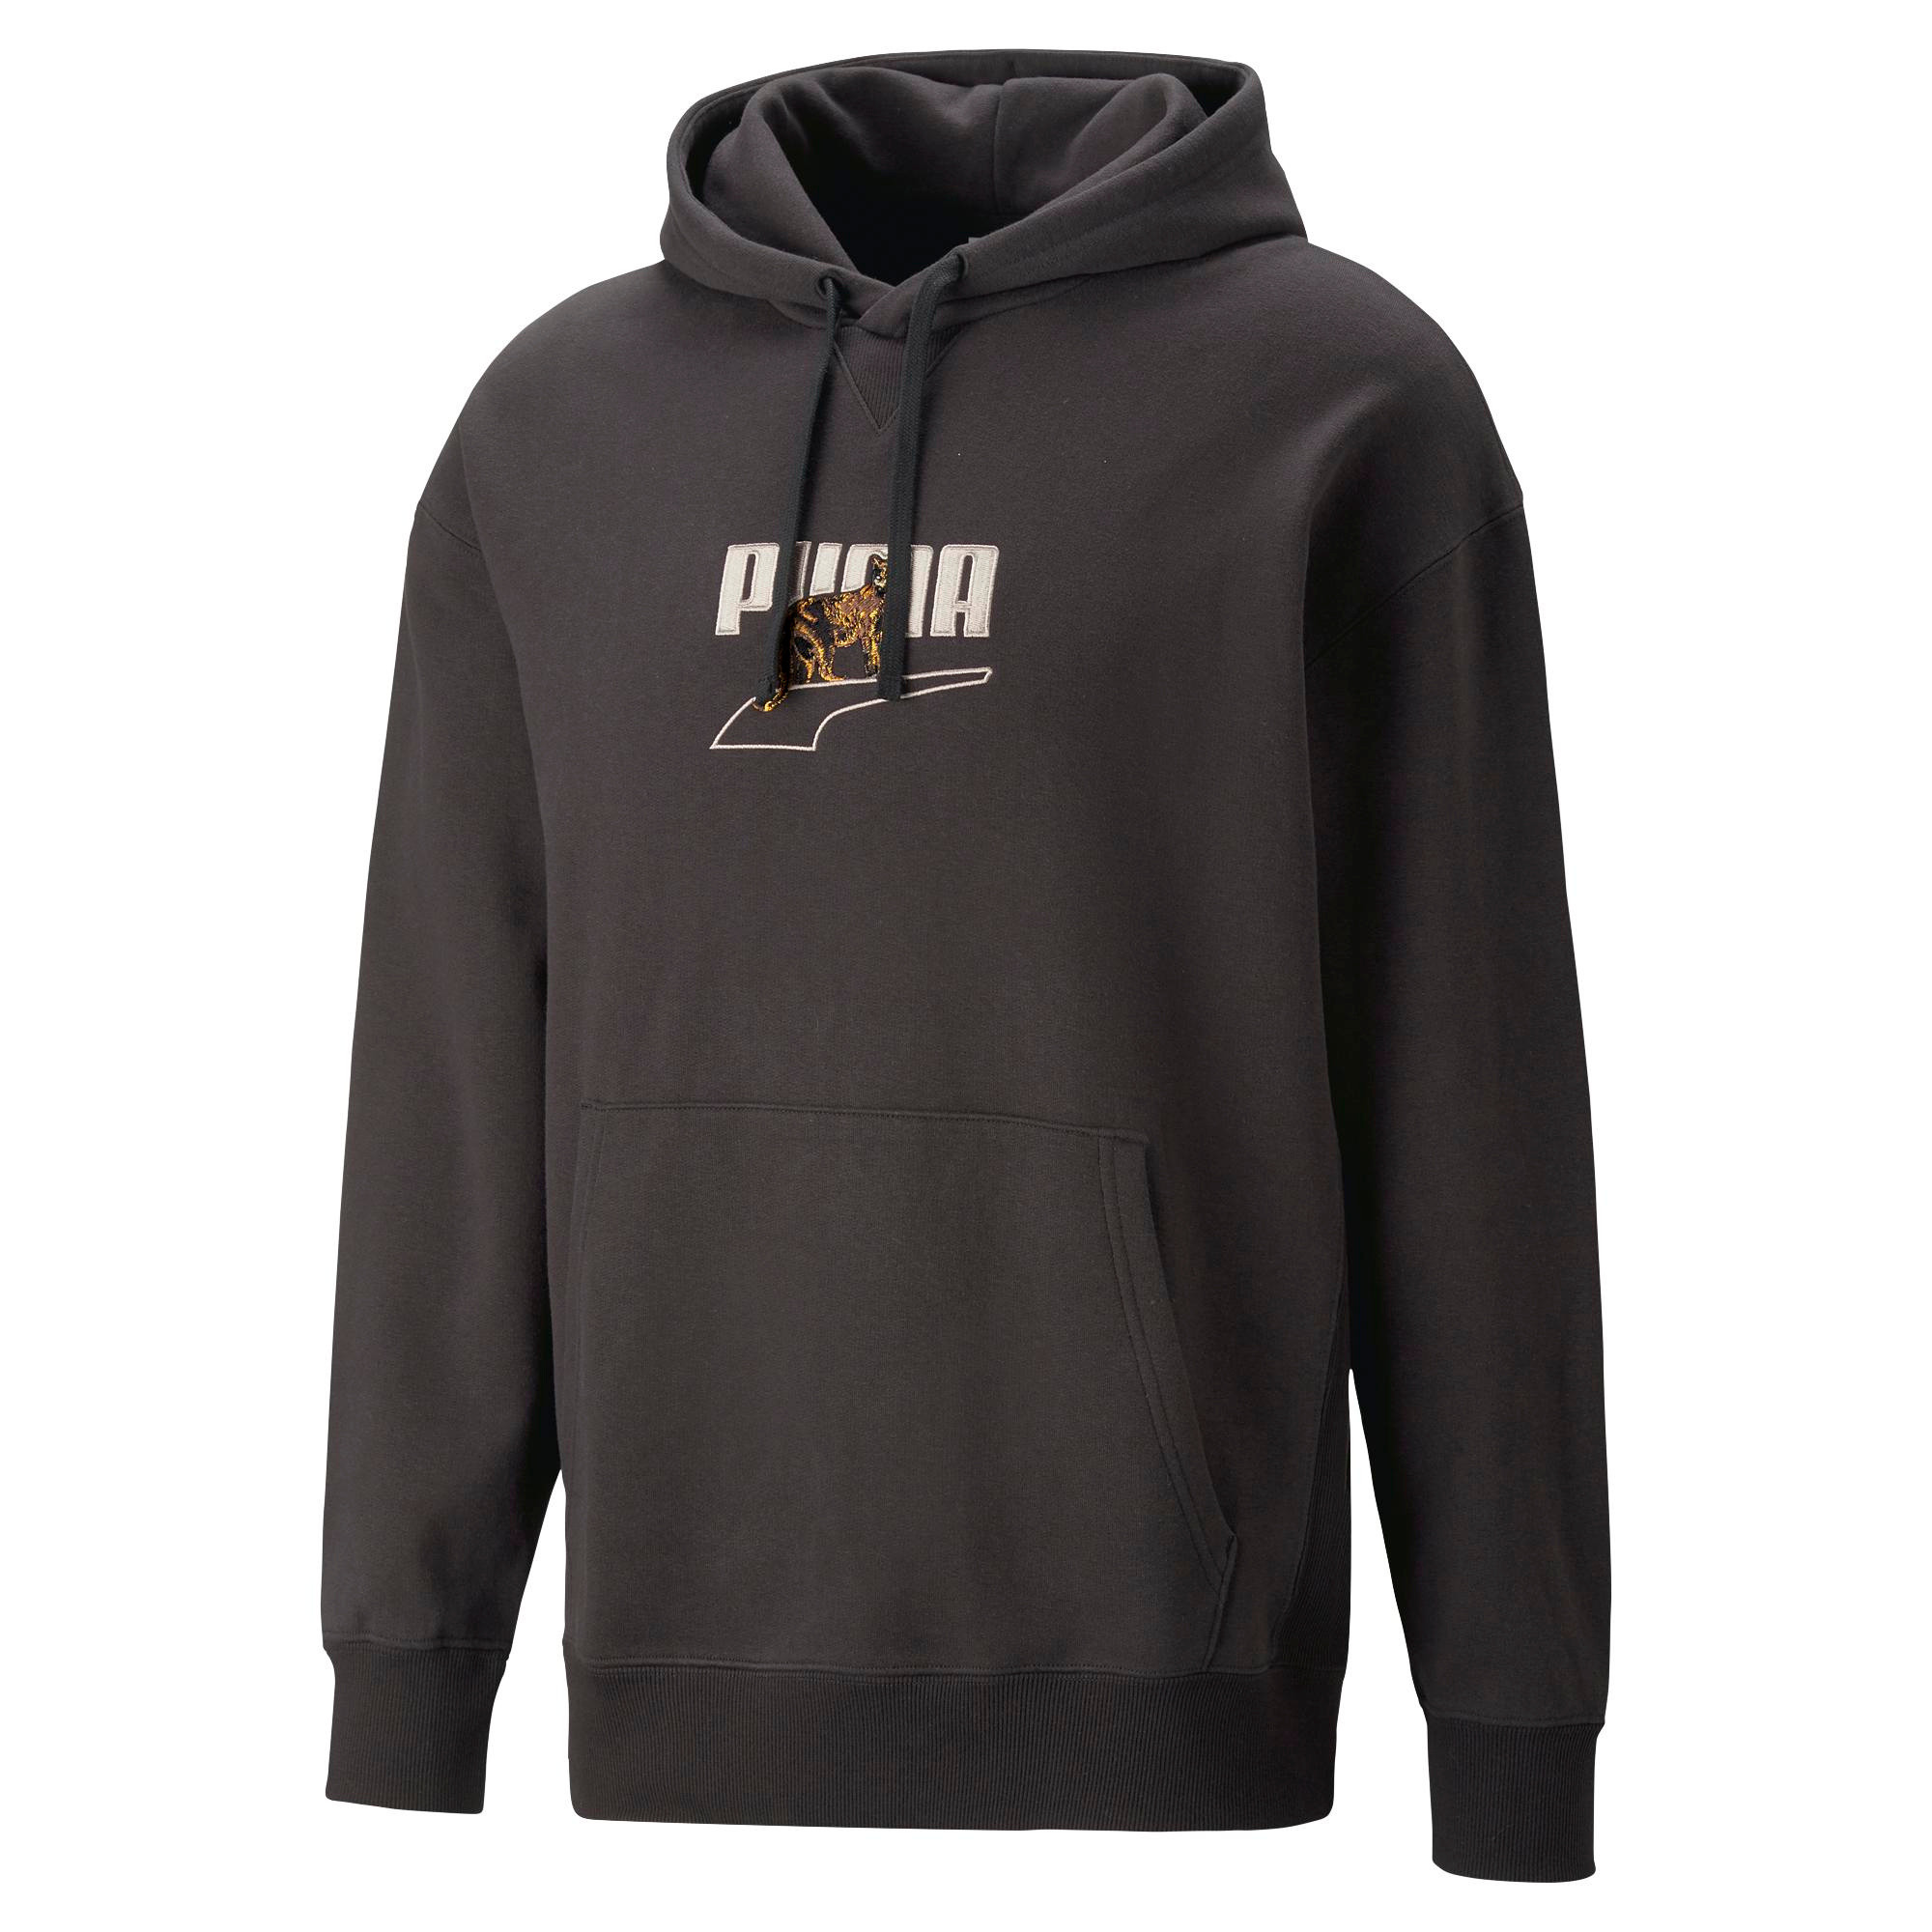 Puma - Cotton hooded sweatshirt with graphic print, Black, large image number 0